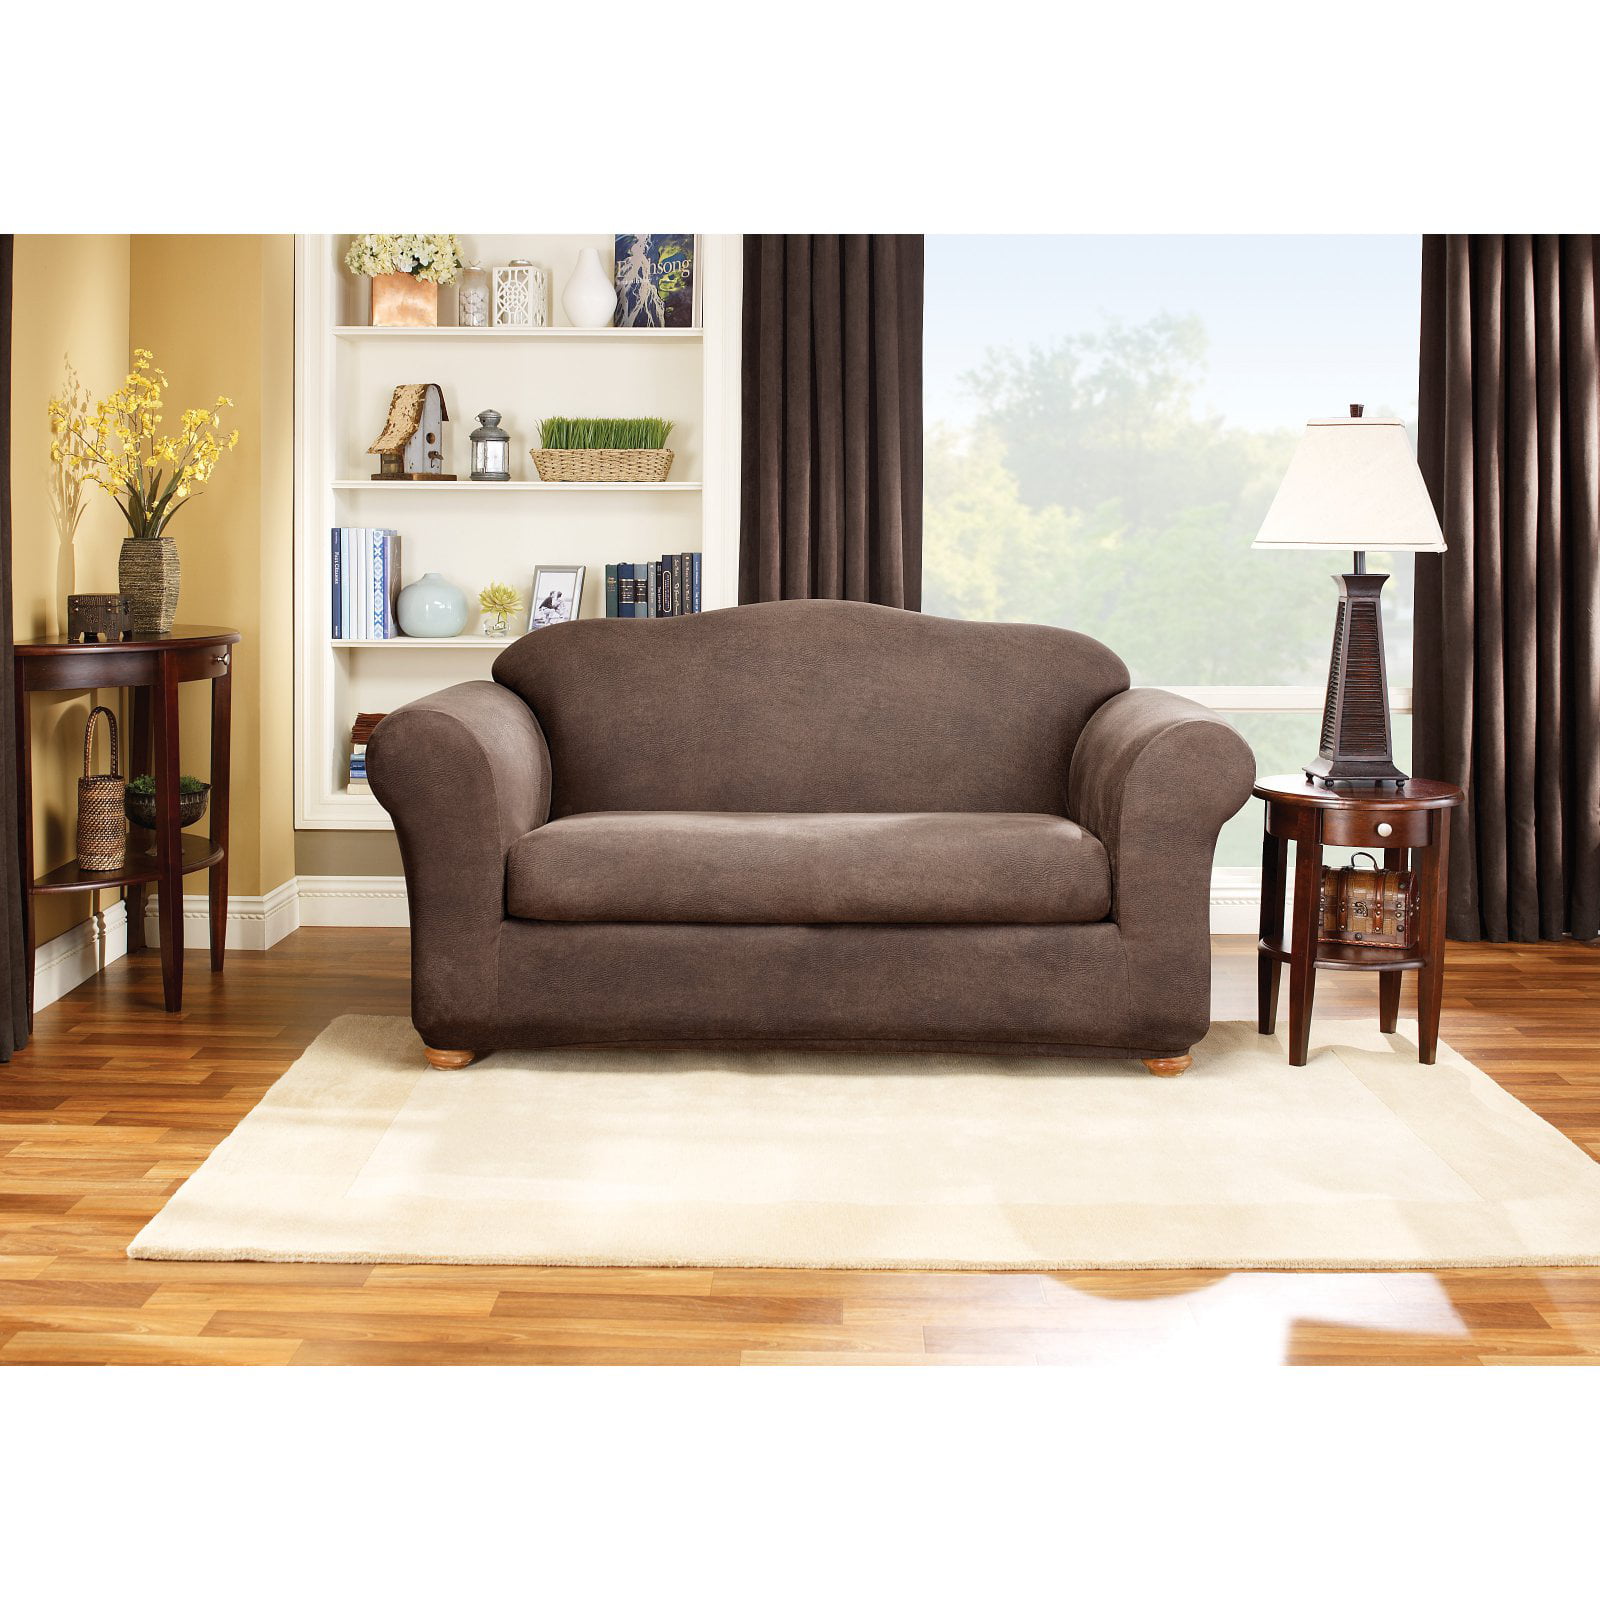 Sure Fit Stretch Leather 2 Piece Sofa, Leather Slipcovers For Sofas